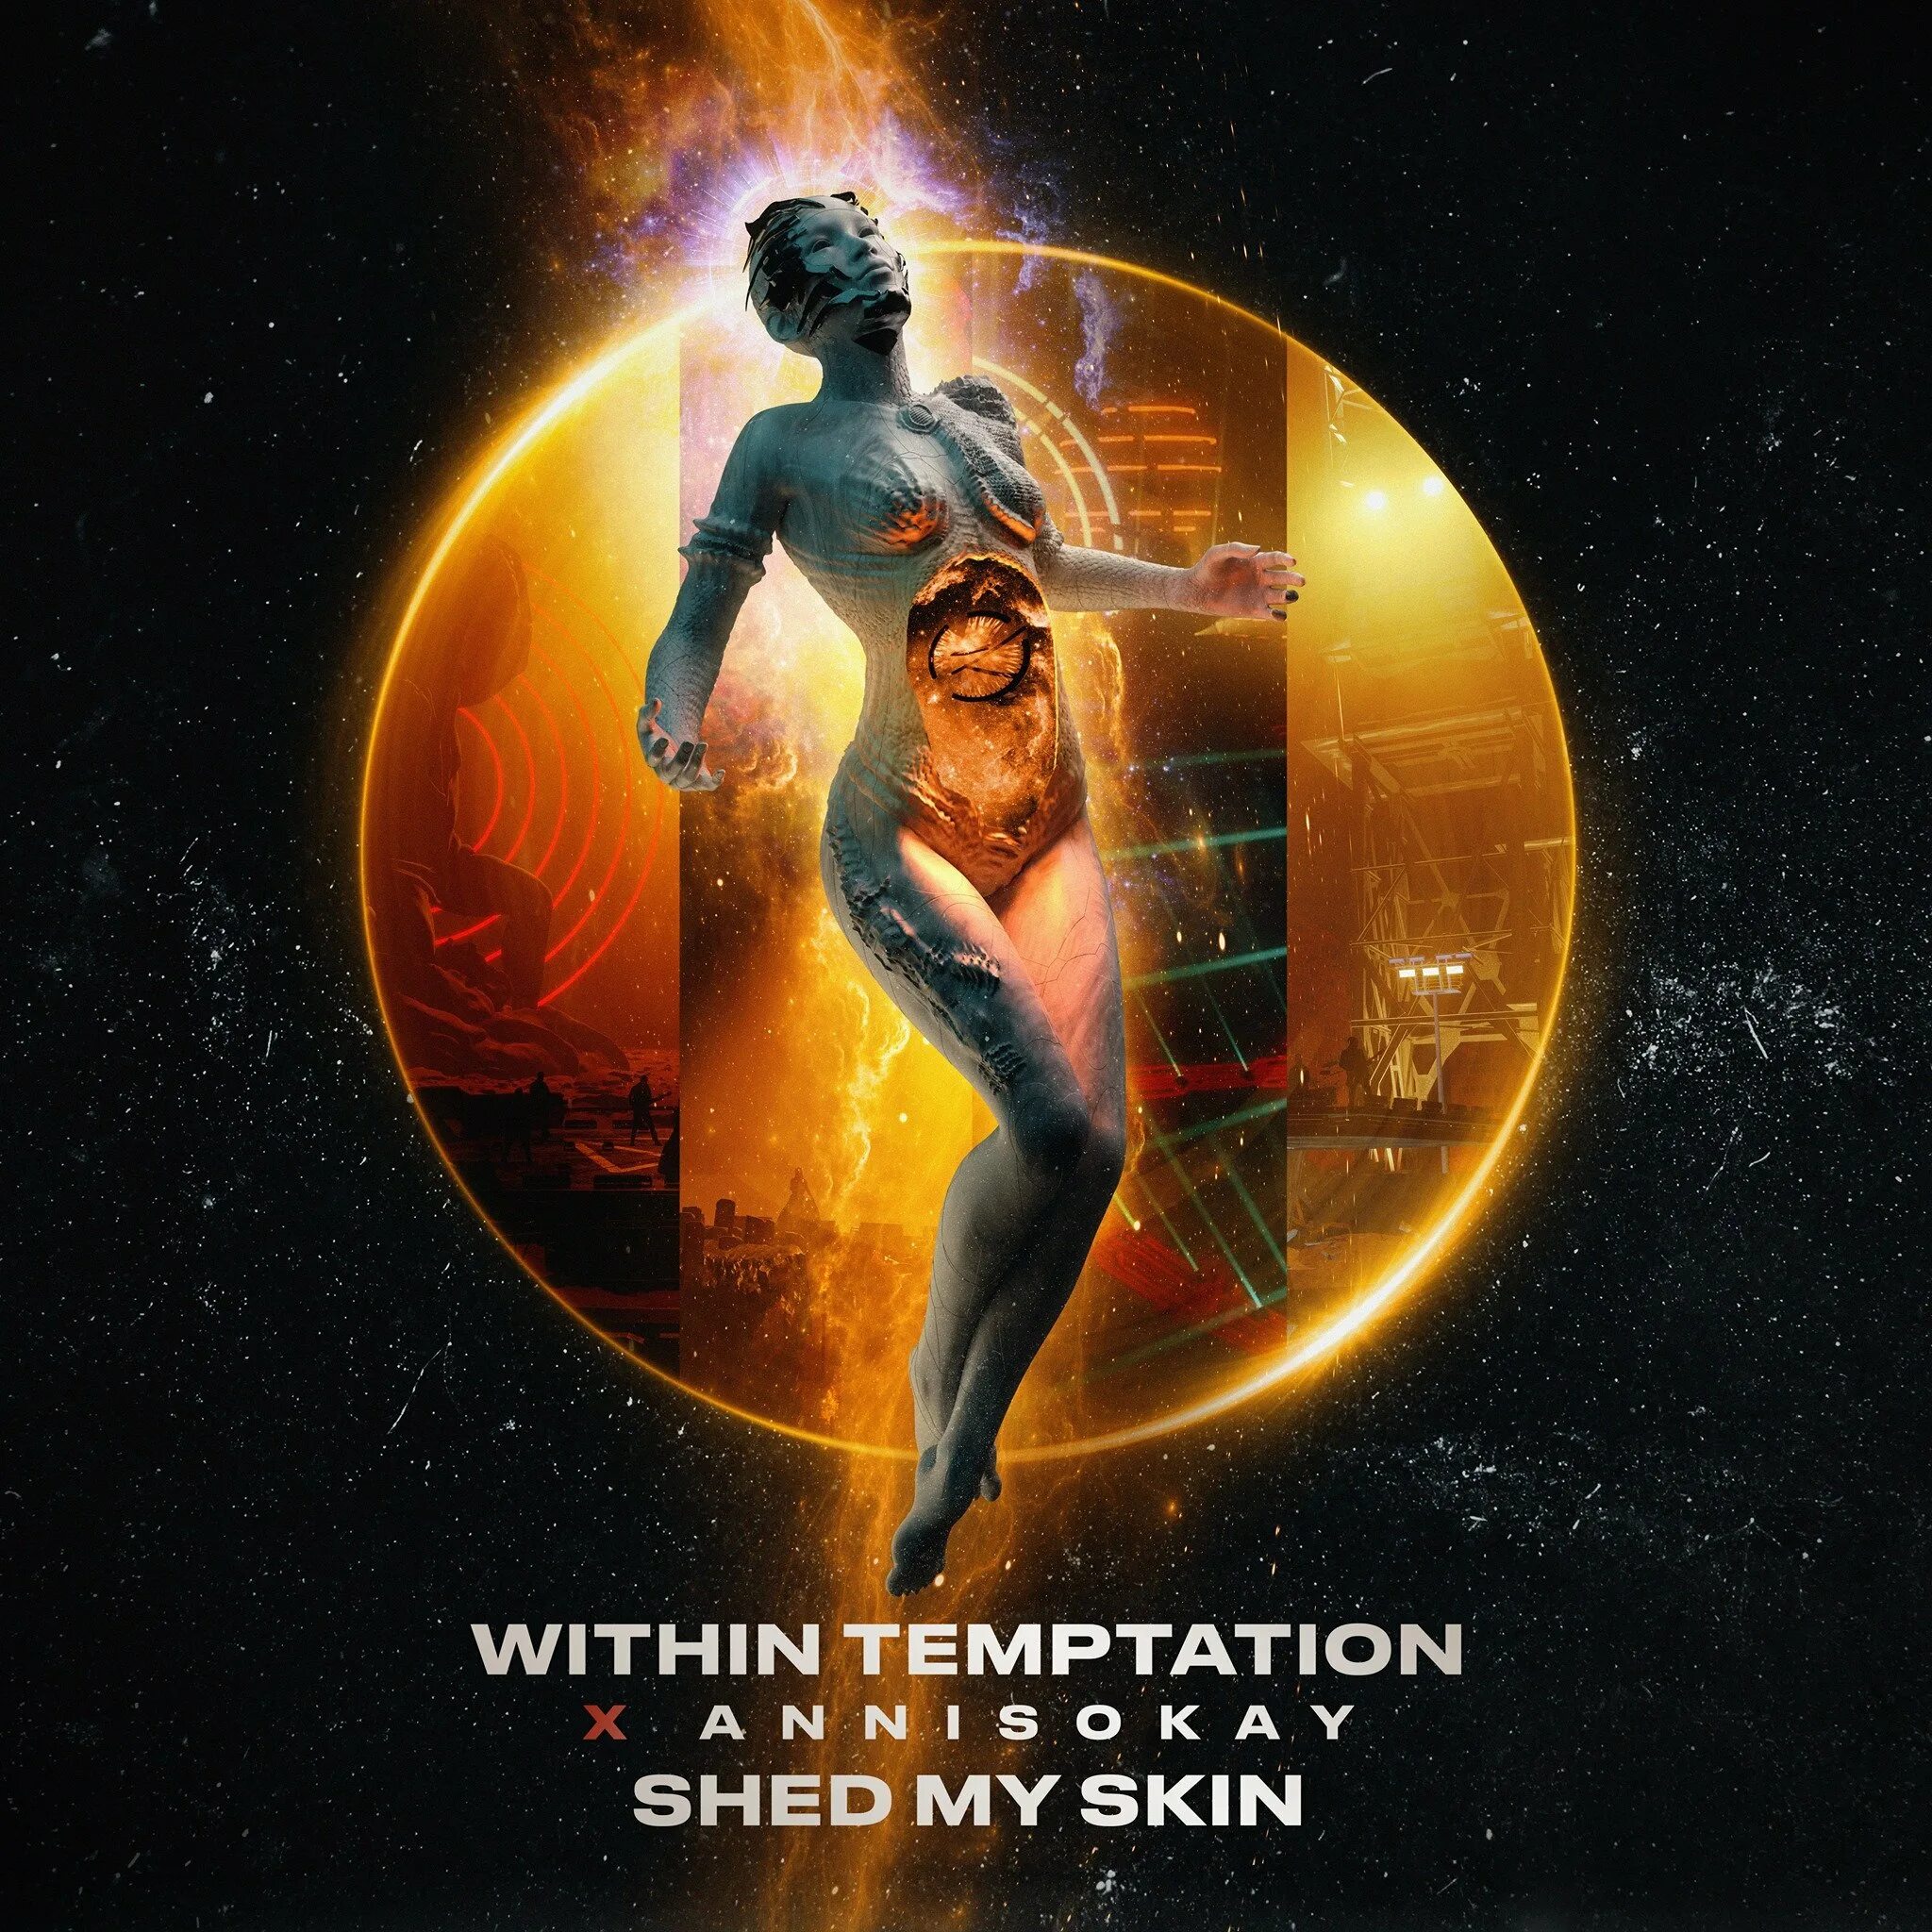 Within Temptation Shed my Skin. Within Temptation, Annisokay Shed my Skin. Within Temptation Shed my Skin обложка. Within Temptation обложки. Within temptation bleed